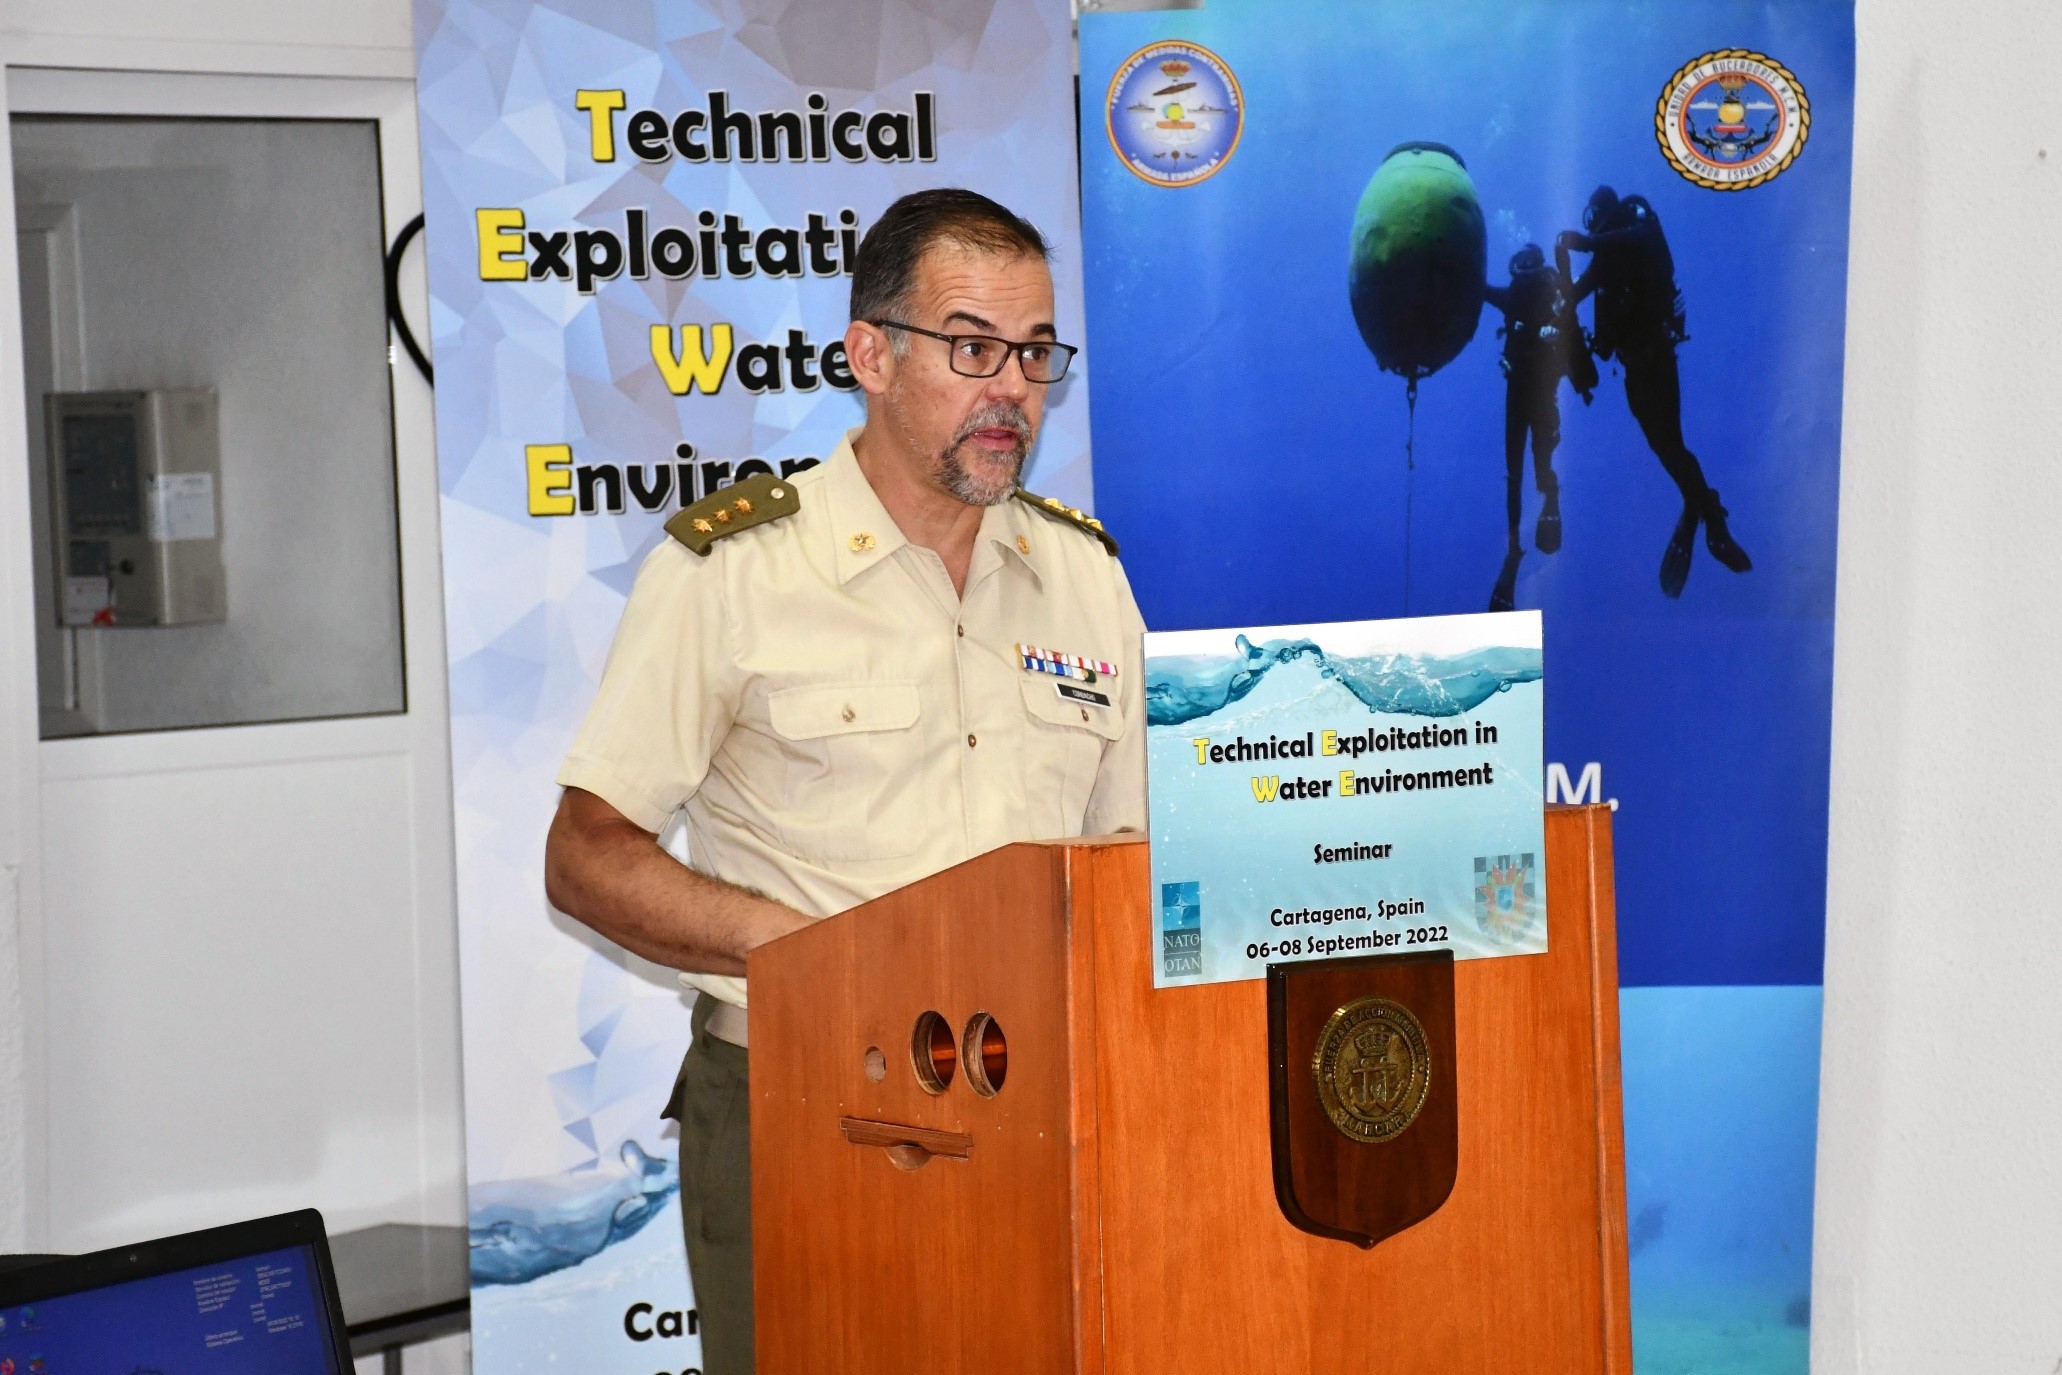 Opening speech by C-IED CoE’s Colonel director